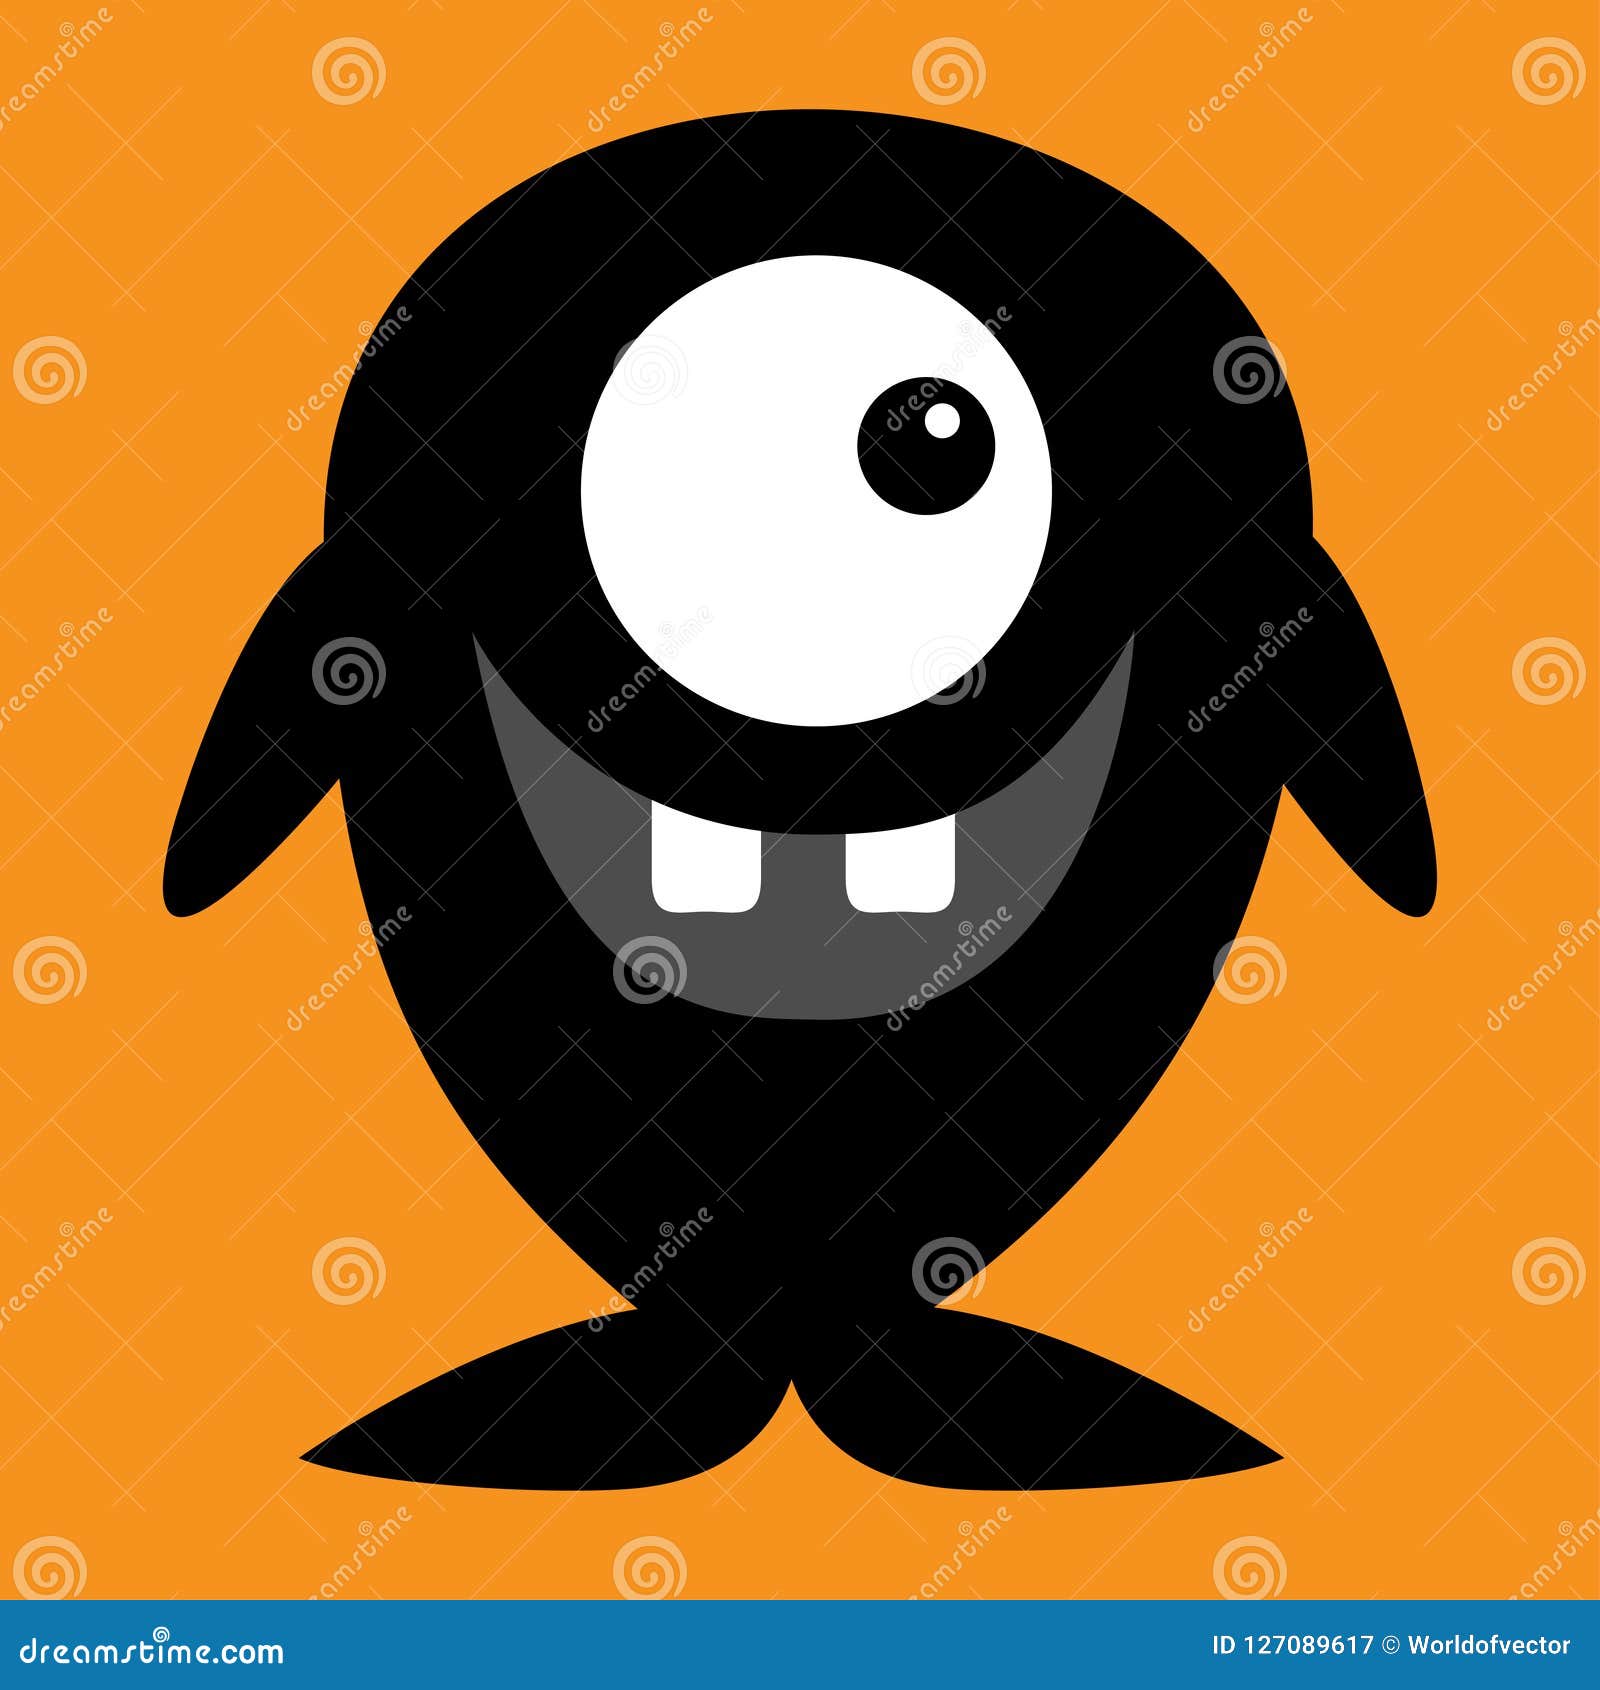 Cute Black Silhouette Monster Icon. Happy Halloween. Cartoon Colorful Scary  Funny Character. One Fish Eye, Tooth. Funny Baby Colle Illustration  127089617 - Megapixl